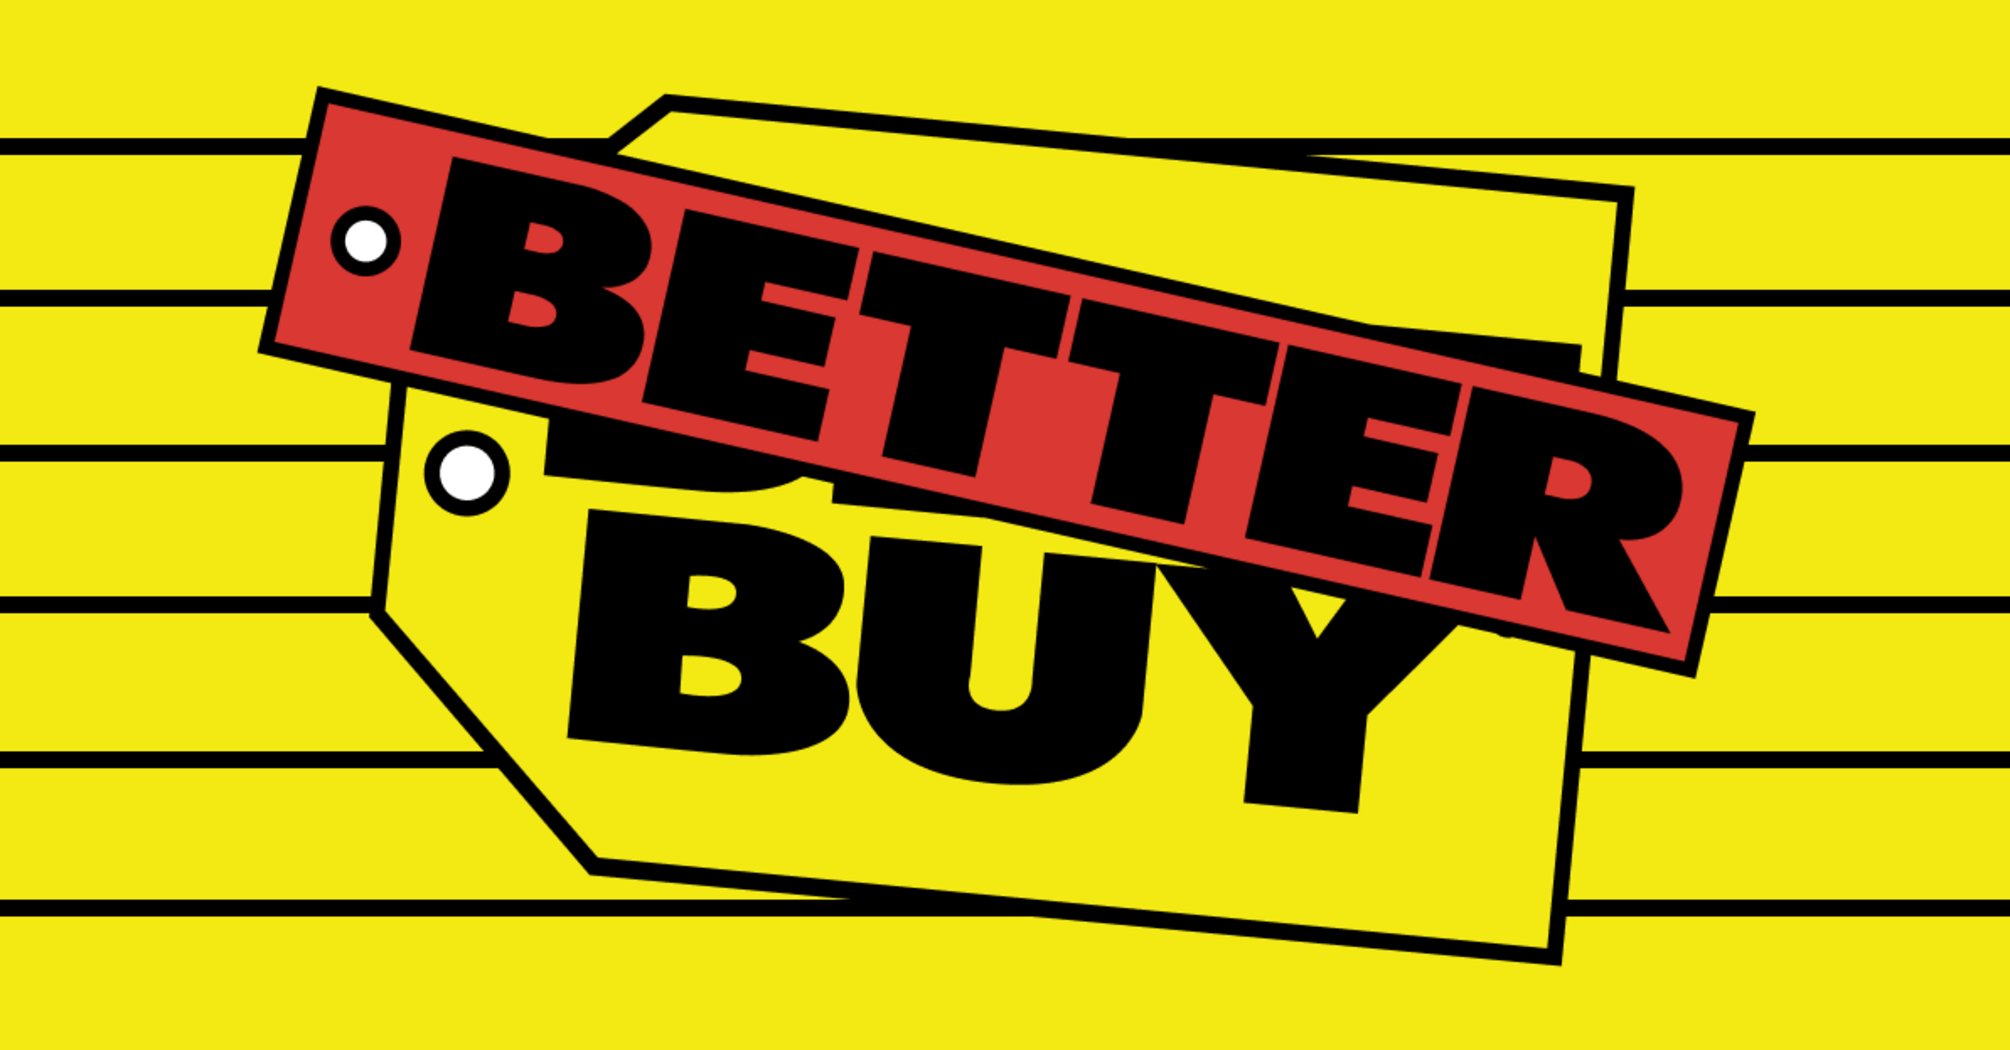 Where is it better to buy